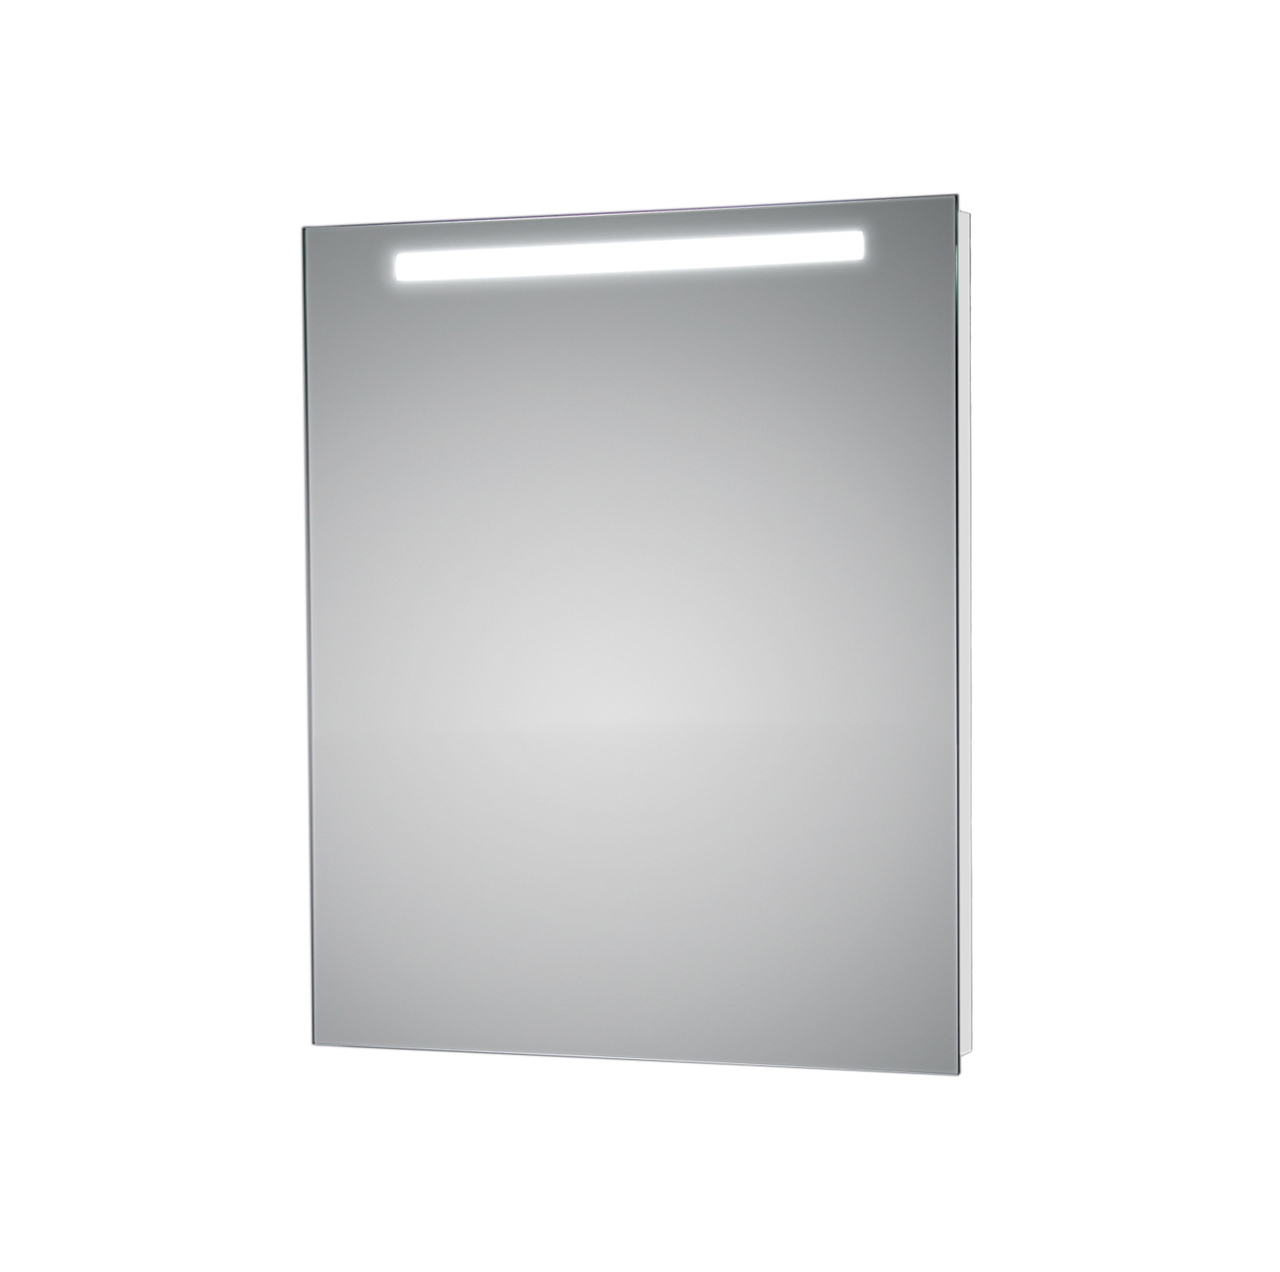 T5-1 mirror with LEd light 27.6 x 35.4